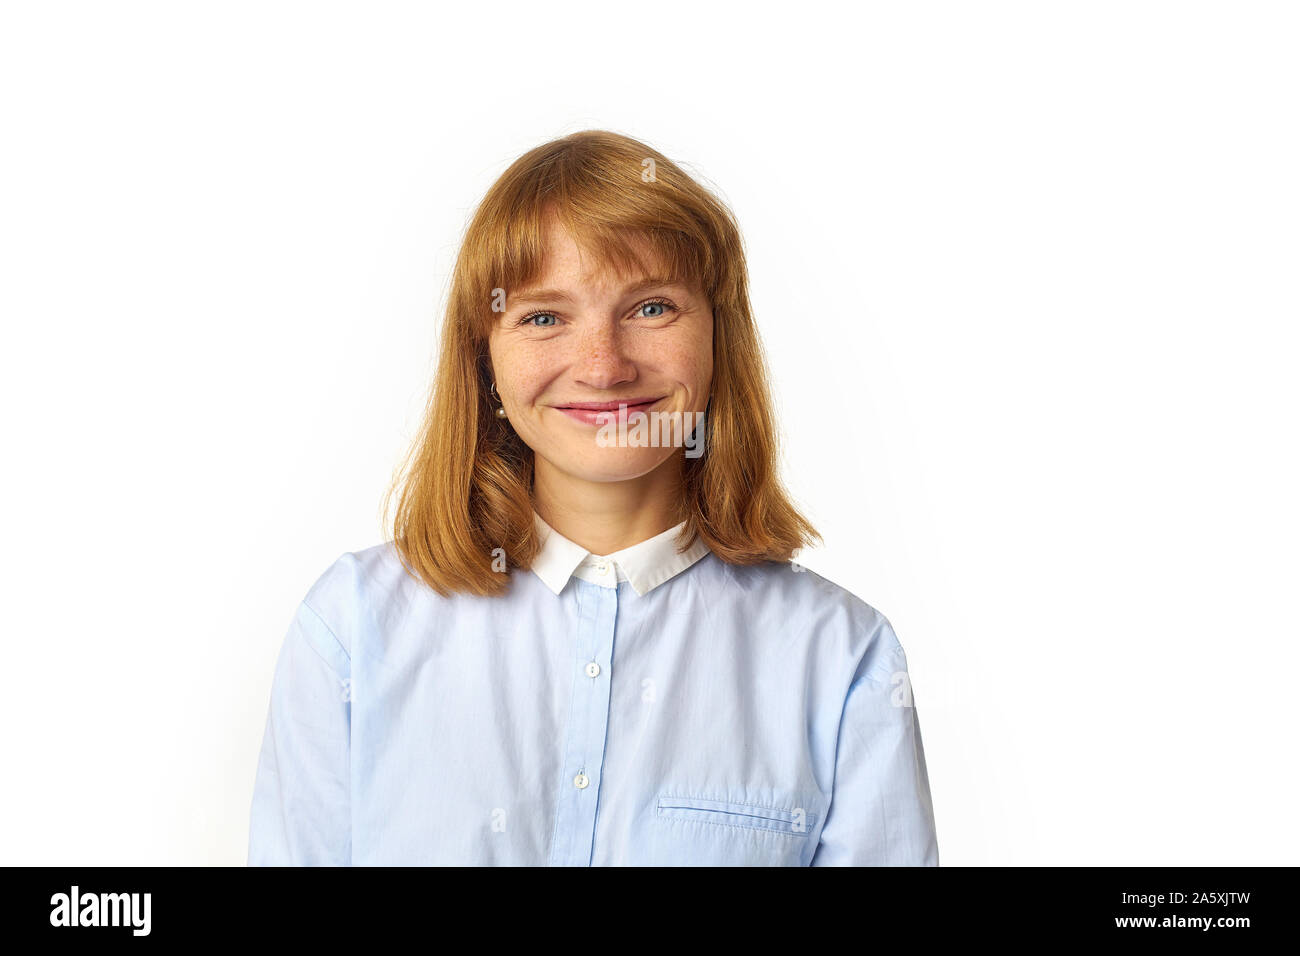 Close up portrait of young belle redhead girl in white shirt smiling at camera. Copier l'espace. Isolé sur fond blanc. Banque D'Images